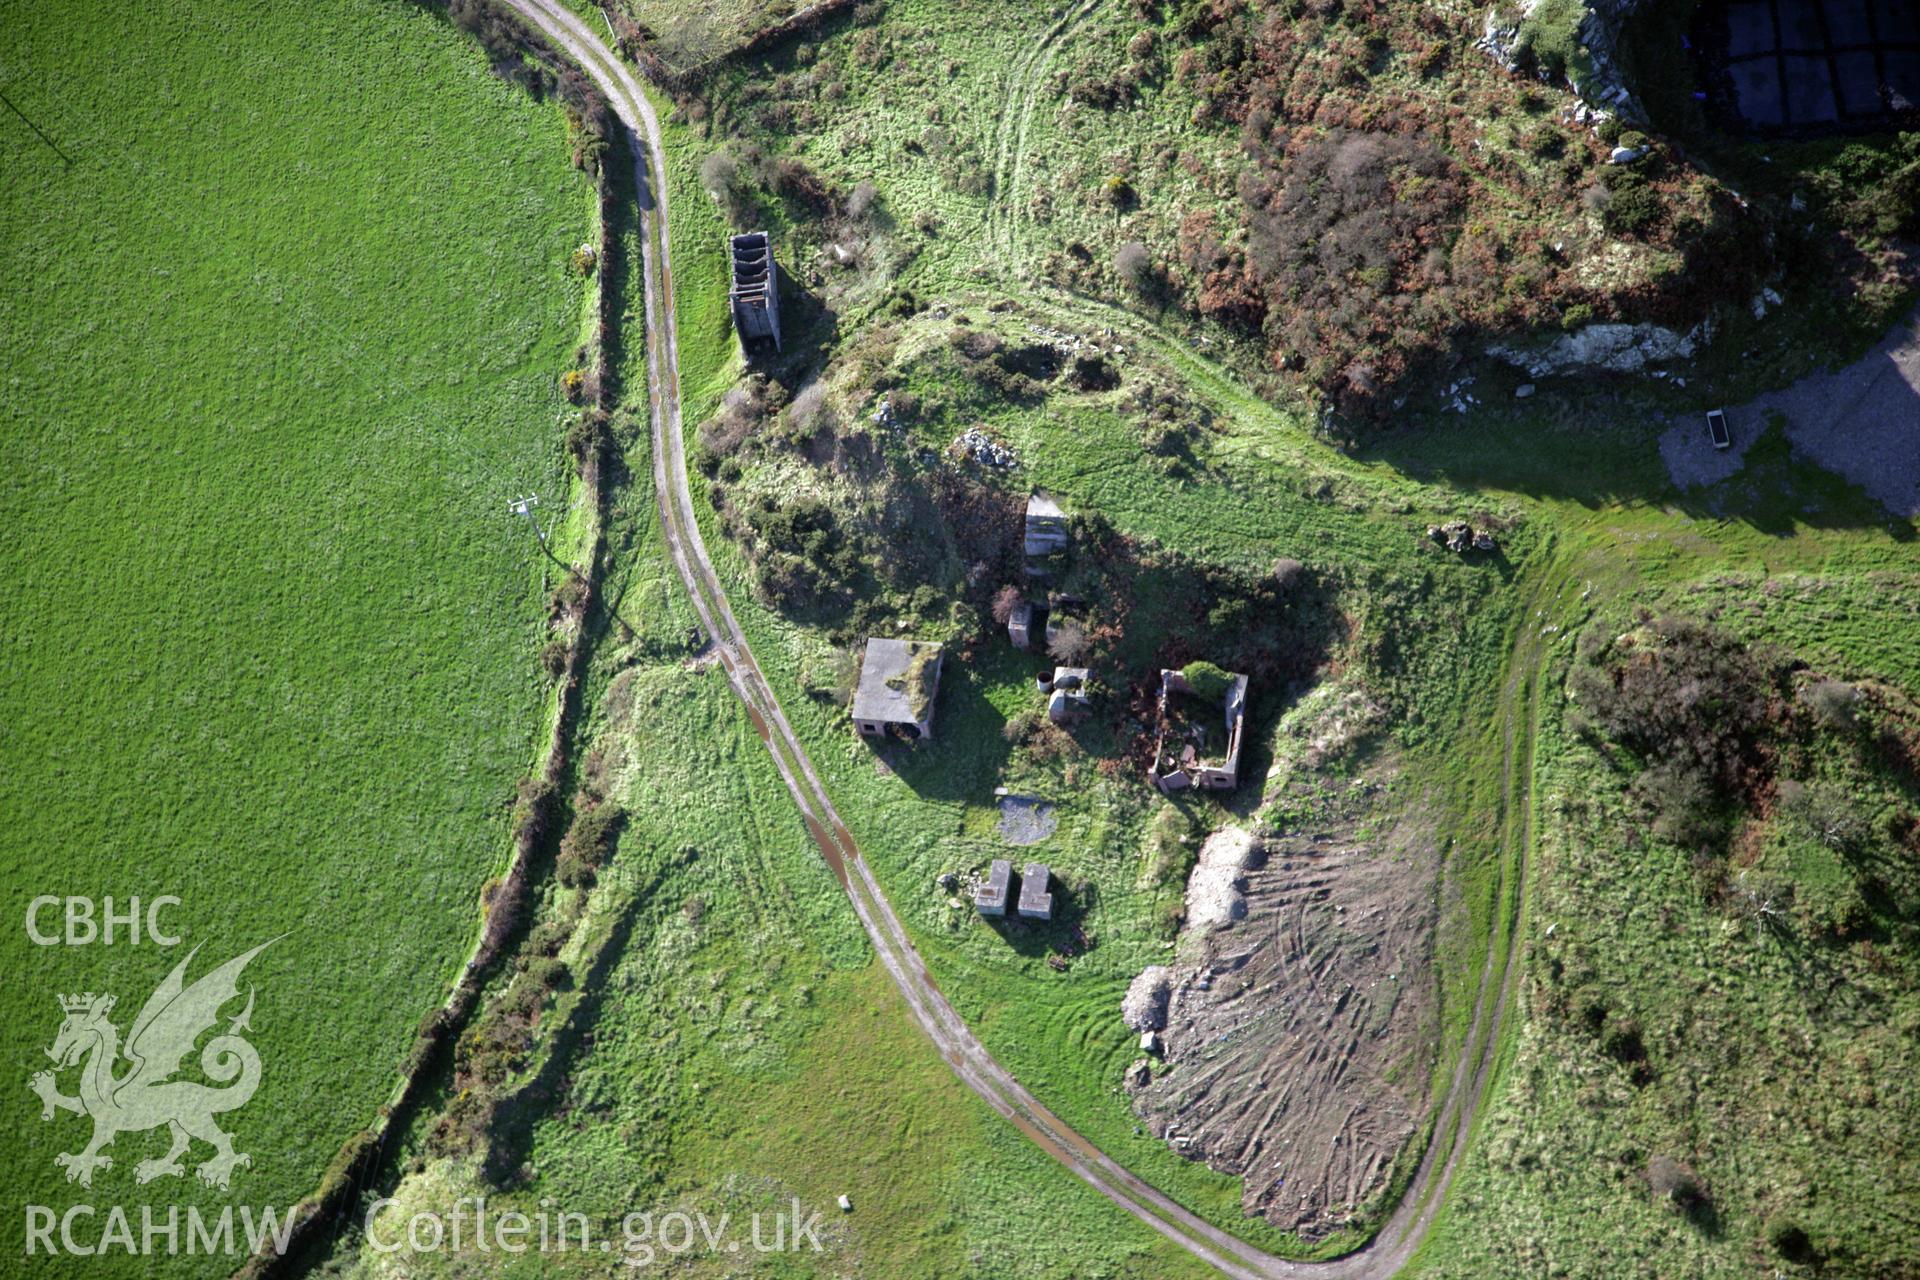 RCAHMW colour oblique photograph of Penberry Quarry, viewed from the east. Taken by O. Davies & T. Driver on 22/11/2013.